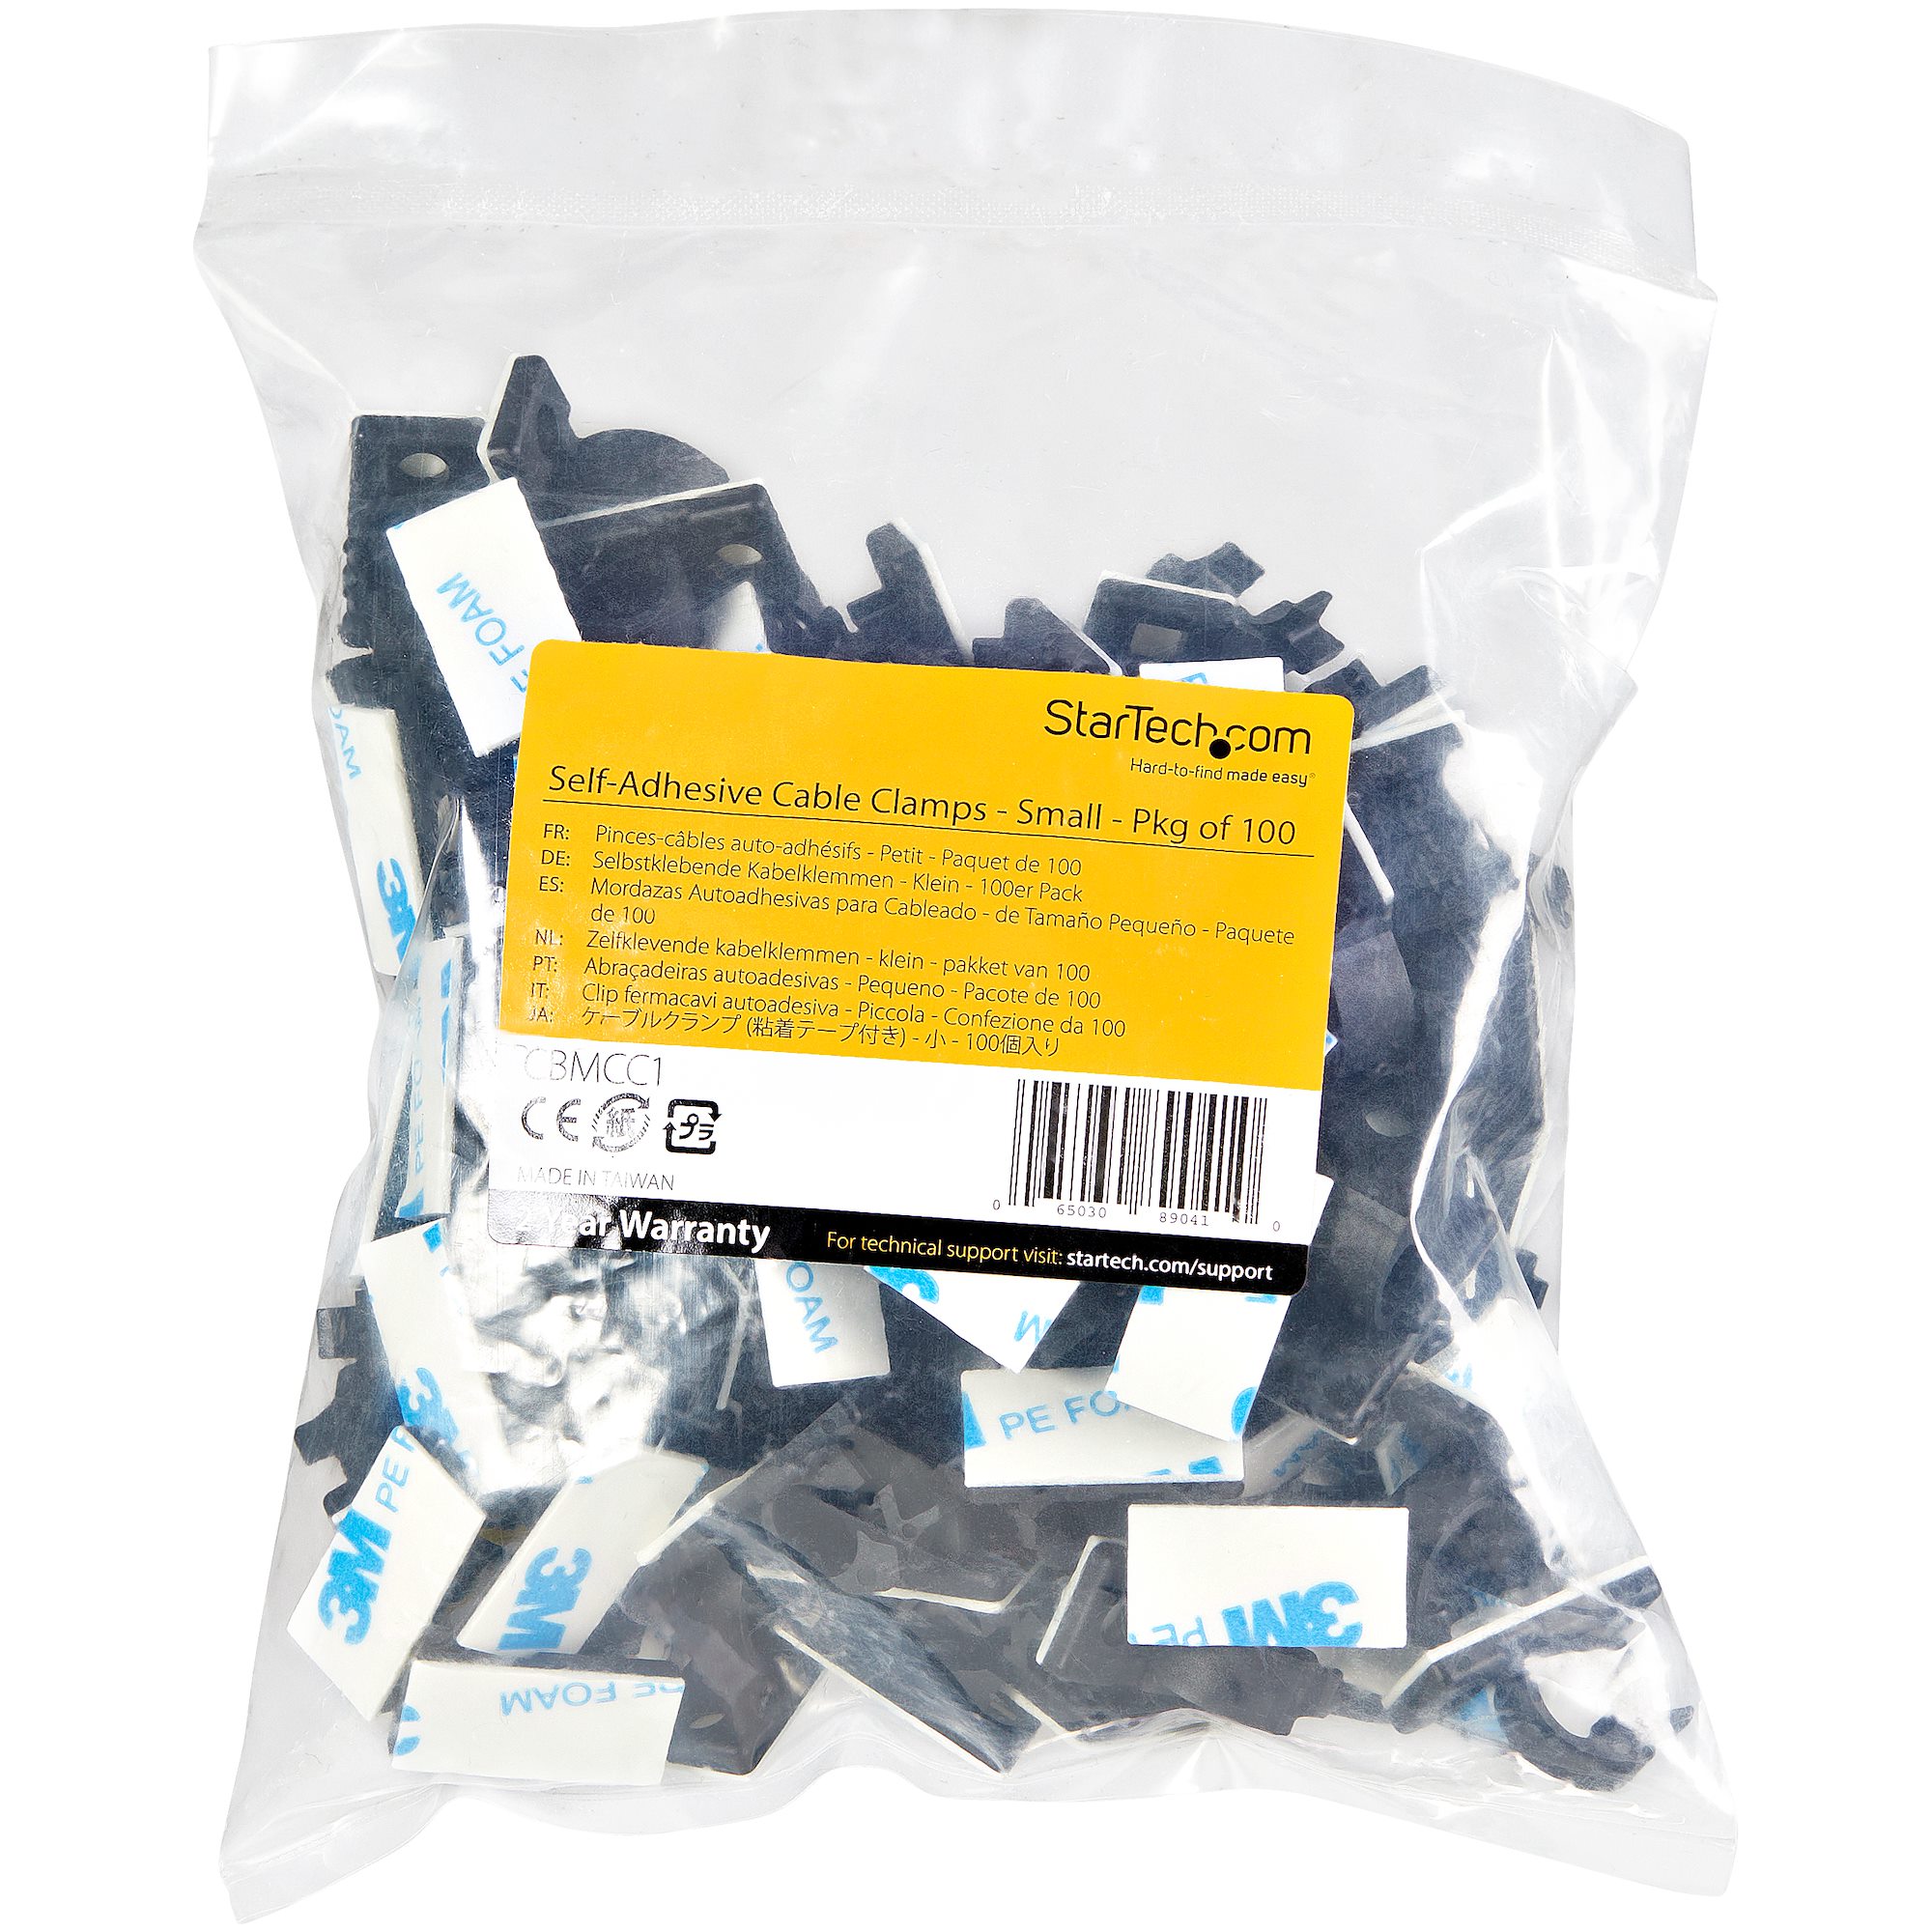 100 Self Adhesive Cable Management Clips - Cable Tying Solutions